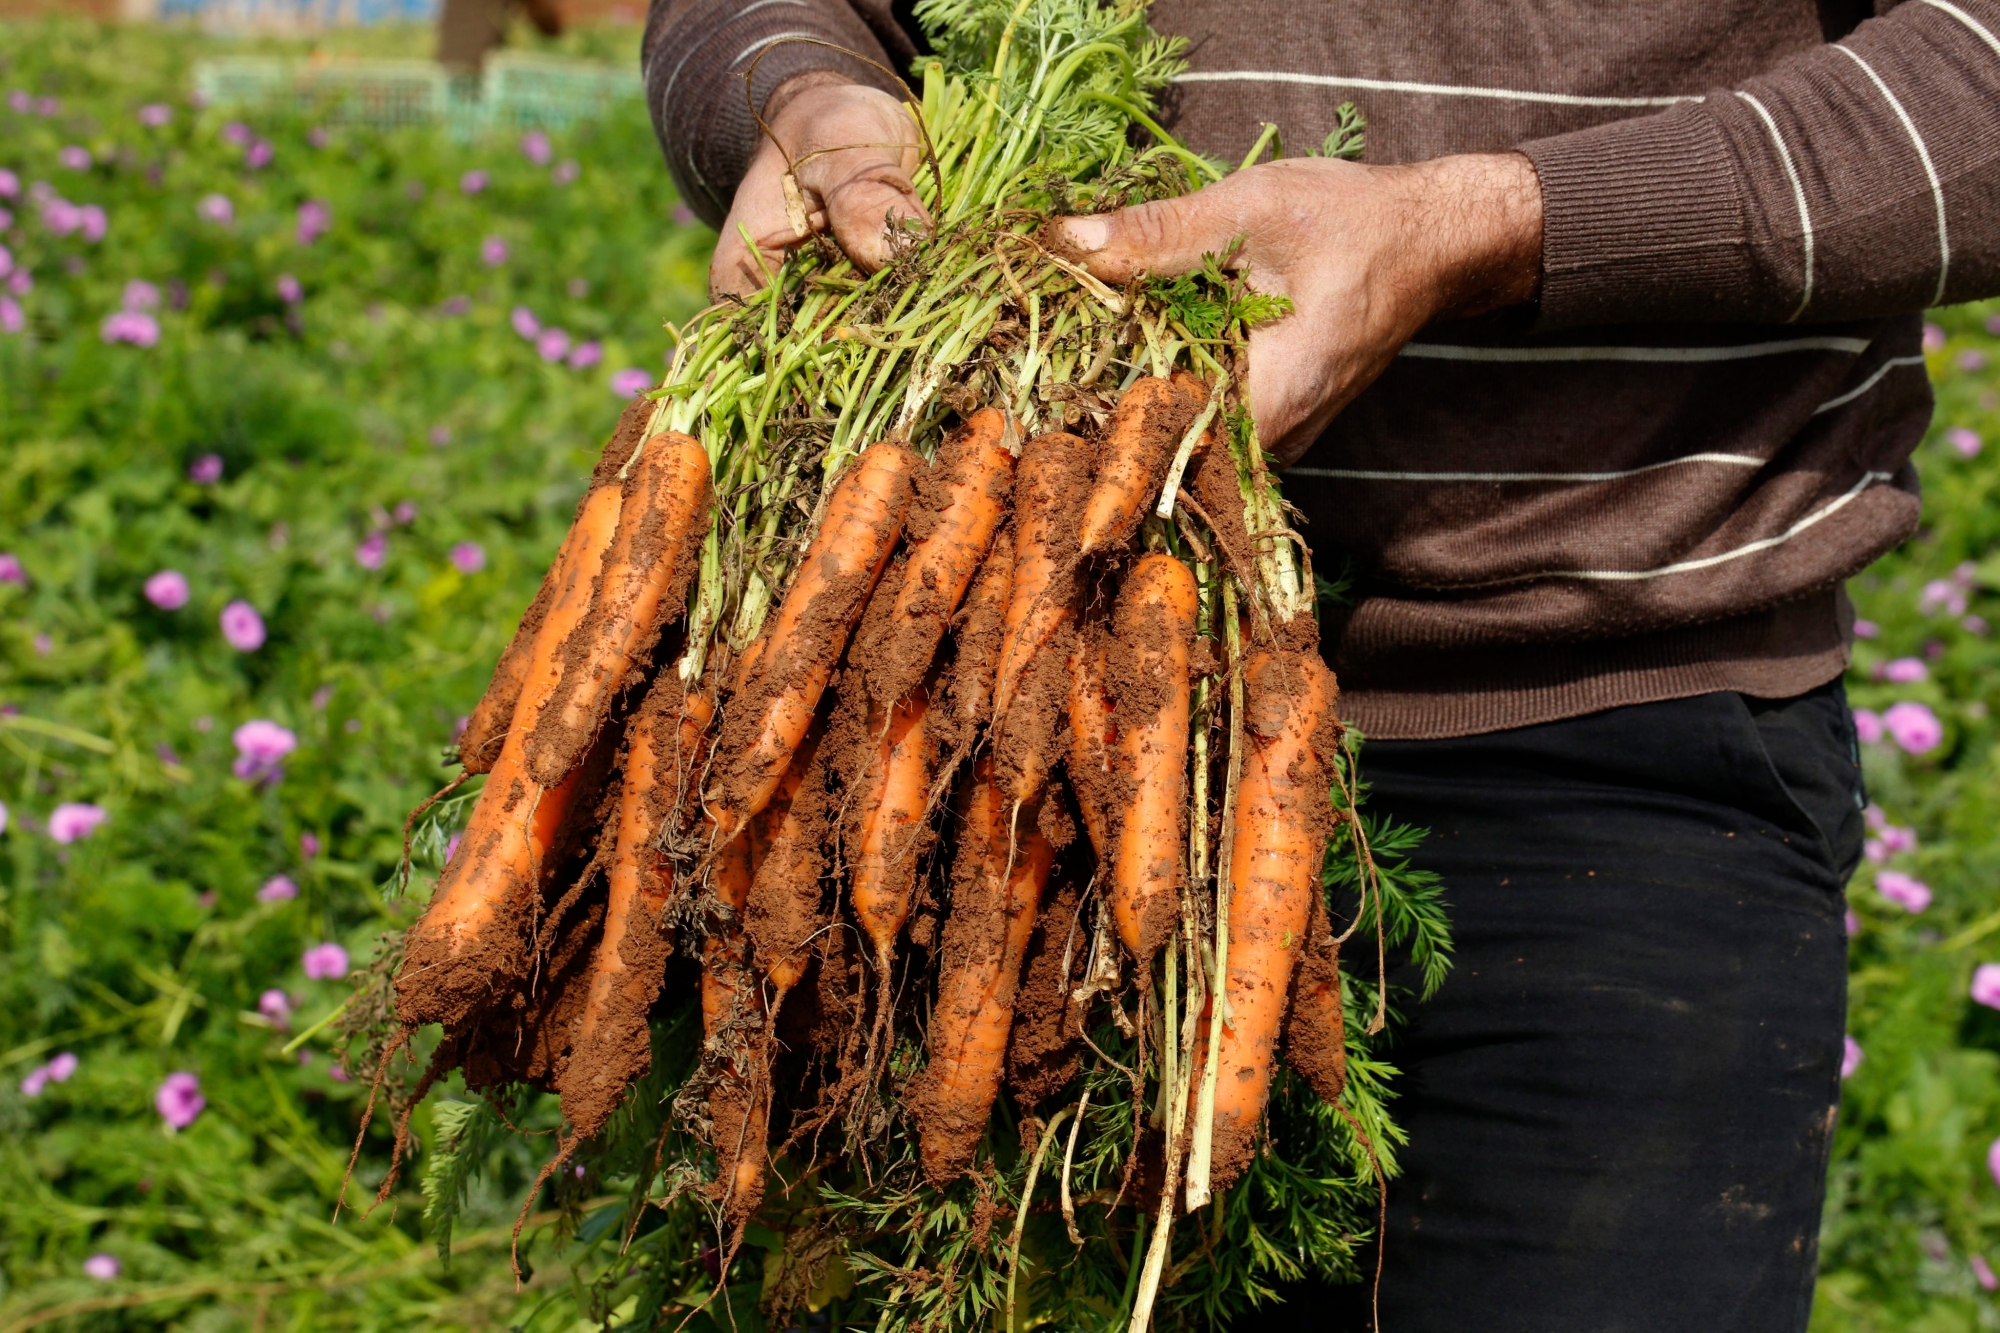 epa04710344 A Palestinian farmer shows the first harvest of carrots on farm near the West Bank City of Nablus, 18 April 2015. Agriculture and farming in the West Bank and Gaza Strip is 'the core of the Palestinian lifestyle and culture' and vital to the region. Farmers mainly offer their fruits and vegetables through local markets while only marginal export to the Middle-East, Gulf and Europe.  EPA/ALAA BADARNEH MIDEAST PALESTINIANS AGRICULTURE